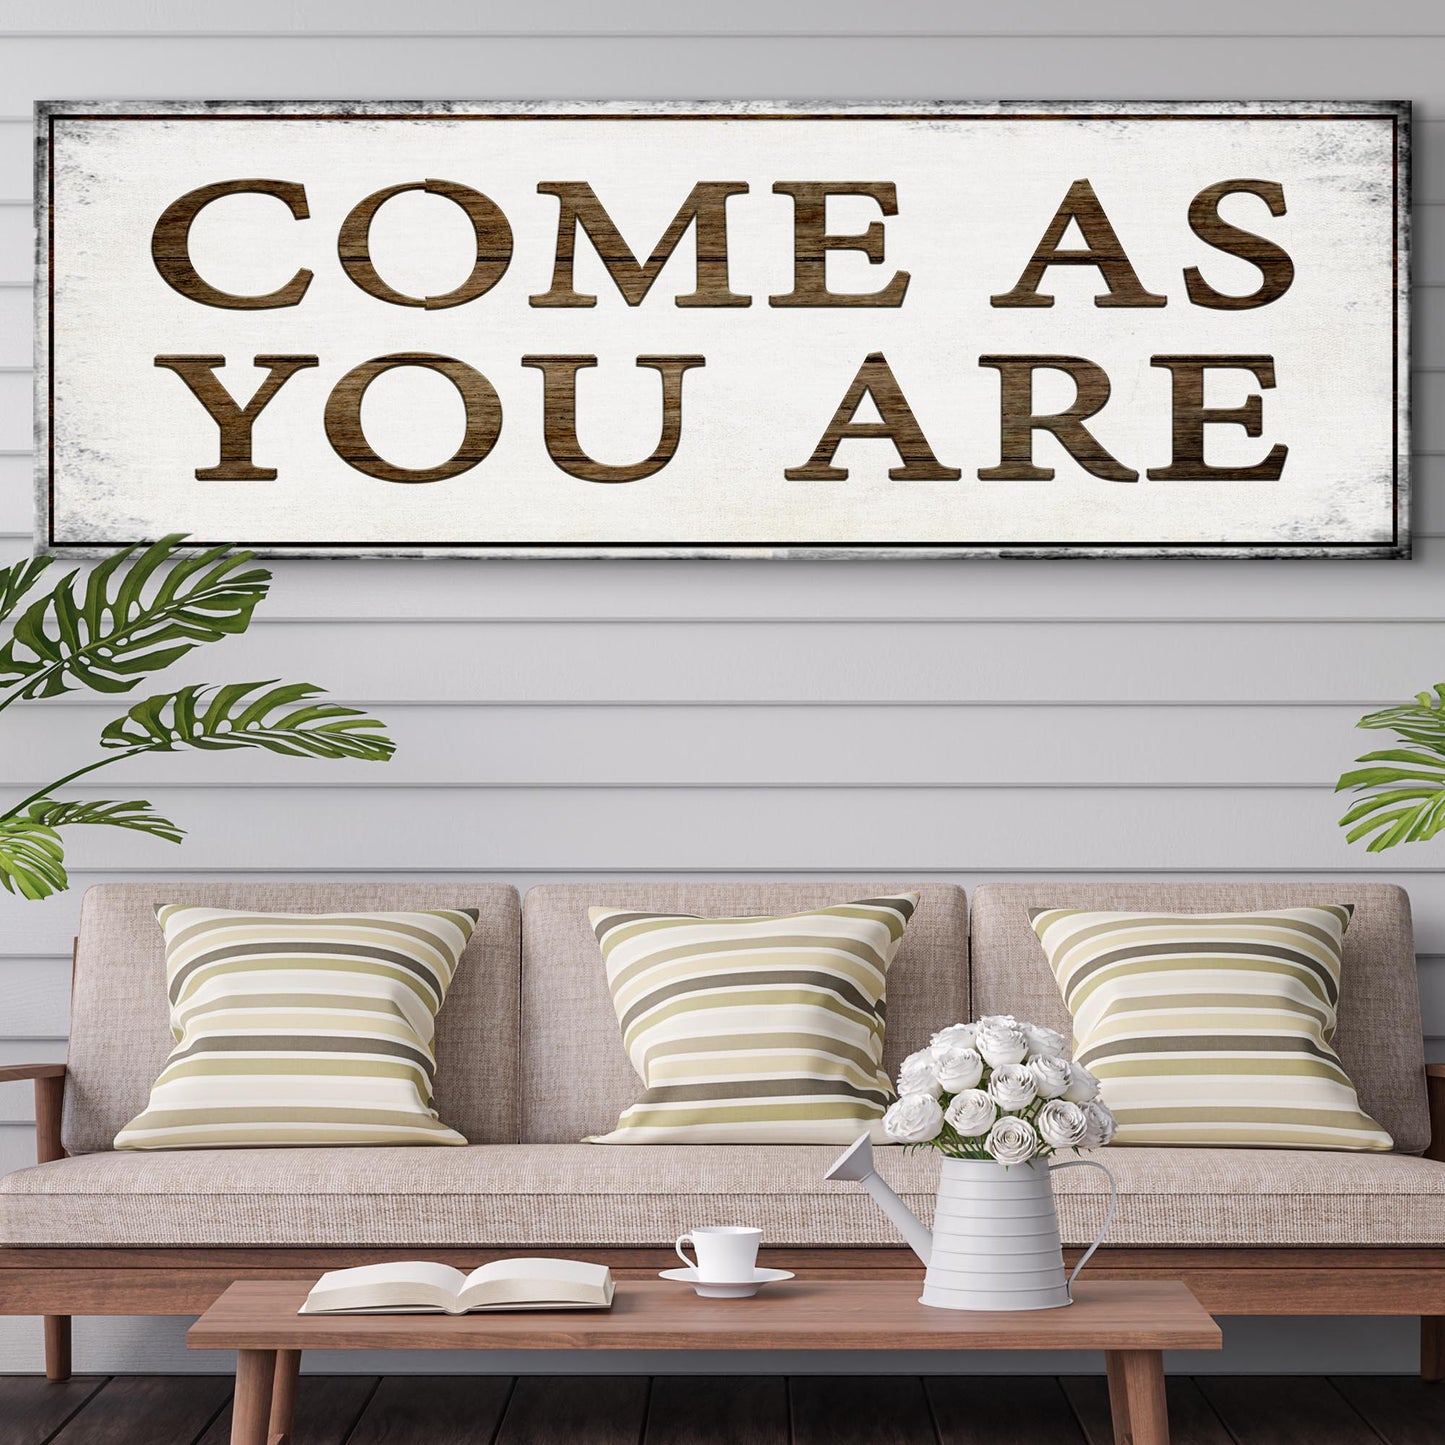 Come As You Are Sign - Image by Tailored Canvases